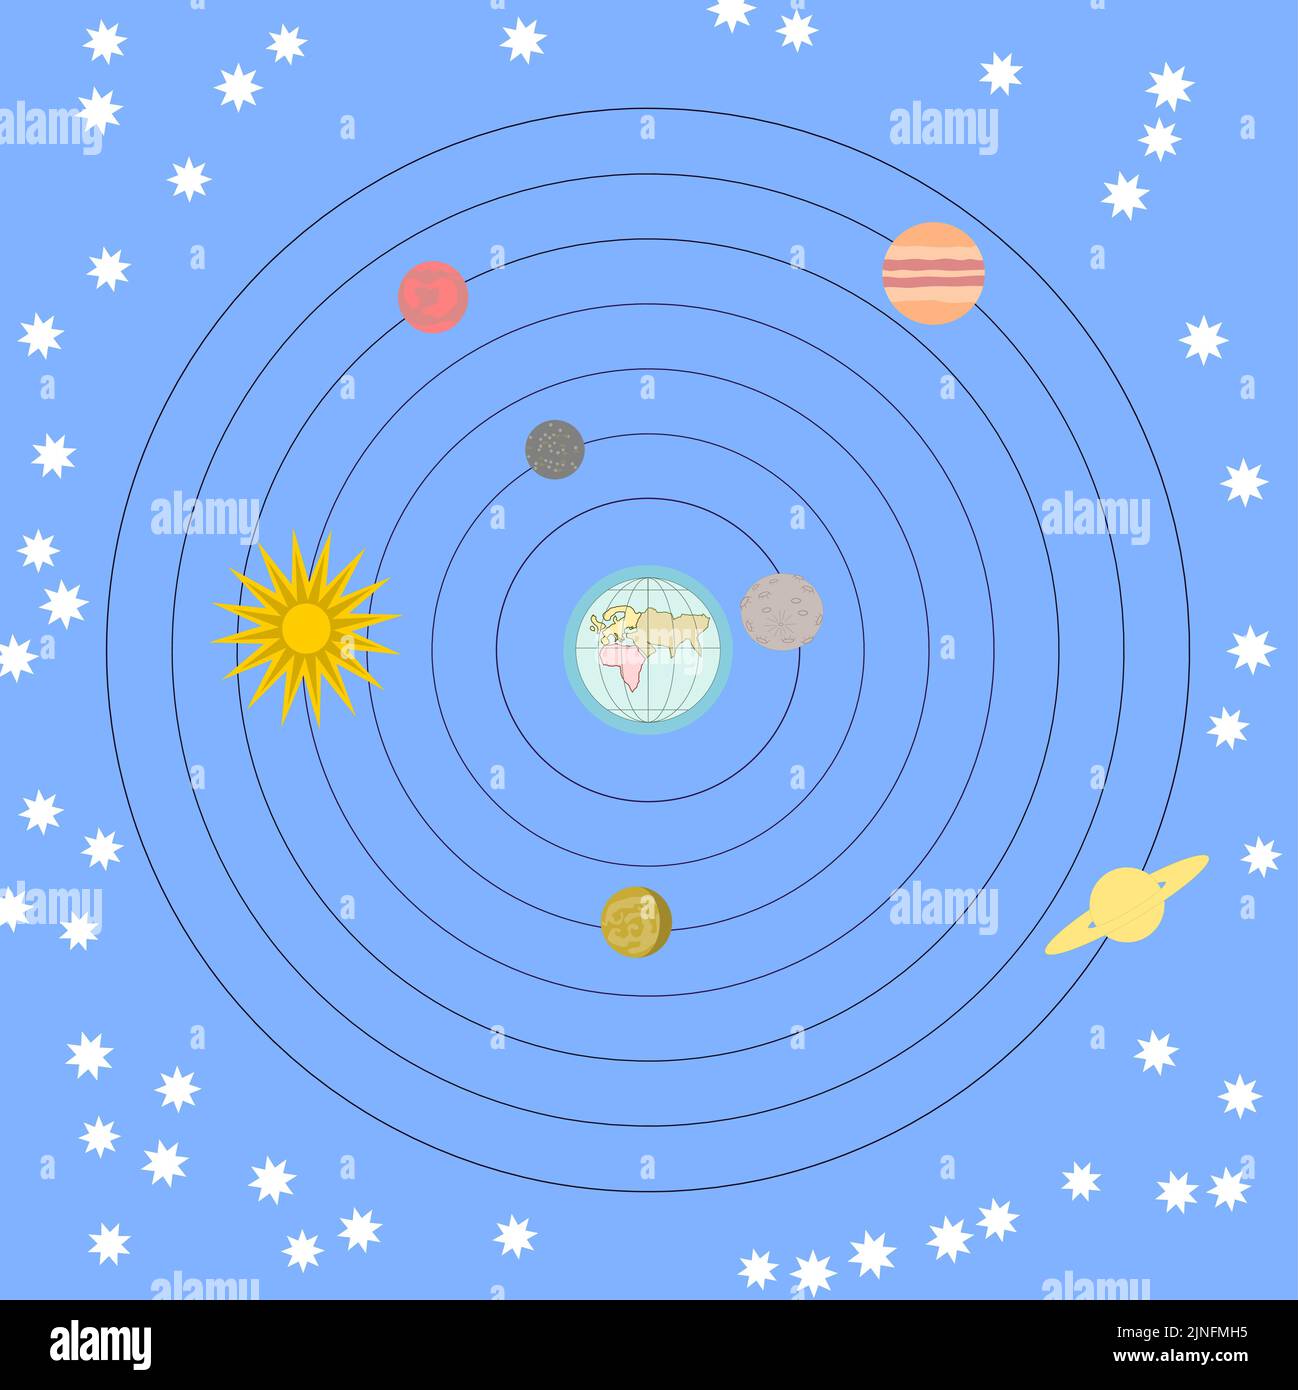 Solar System model with Earth in center according to ancient and medieval scientific ideas Stock Vector